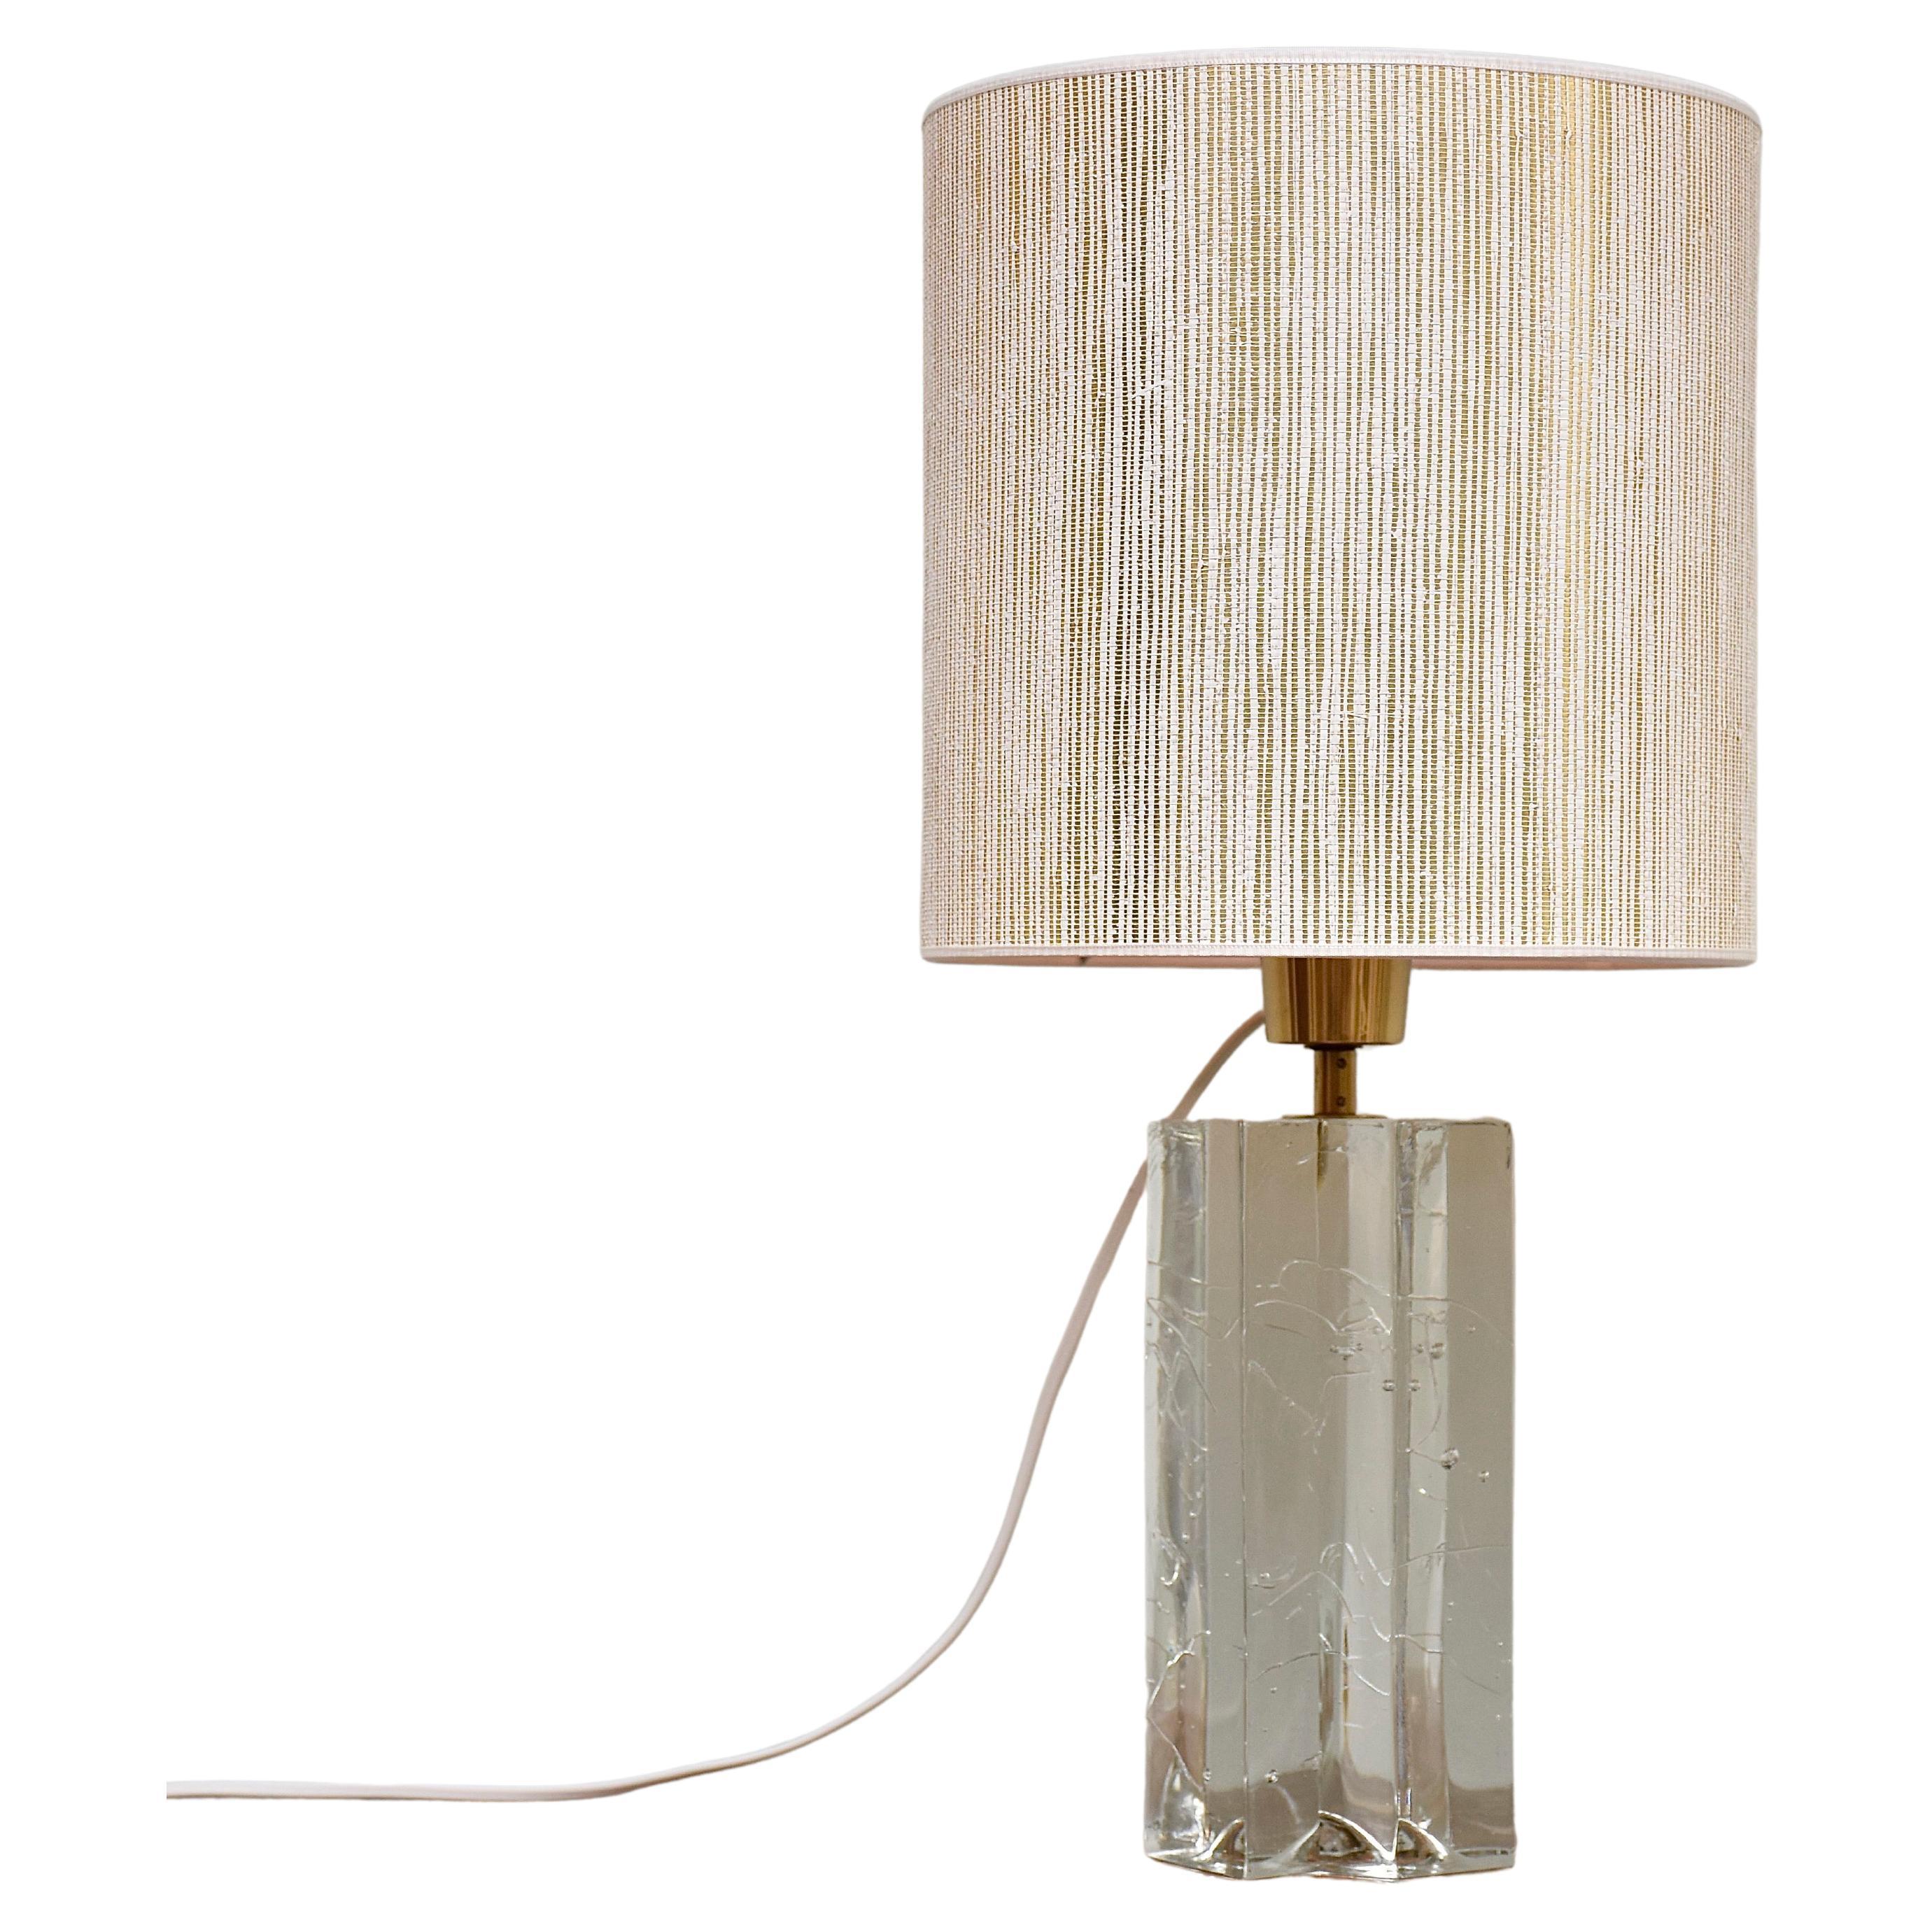 Glass and brass table lamp 'Arkipelago' by Timo Sarpaneva